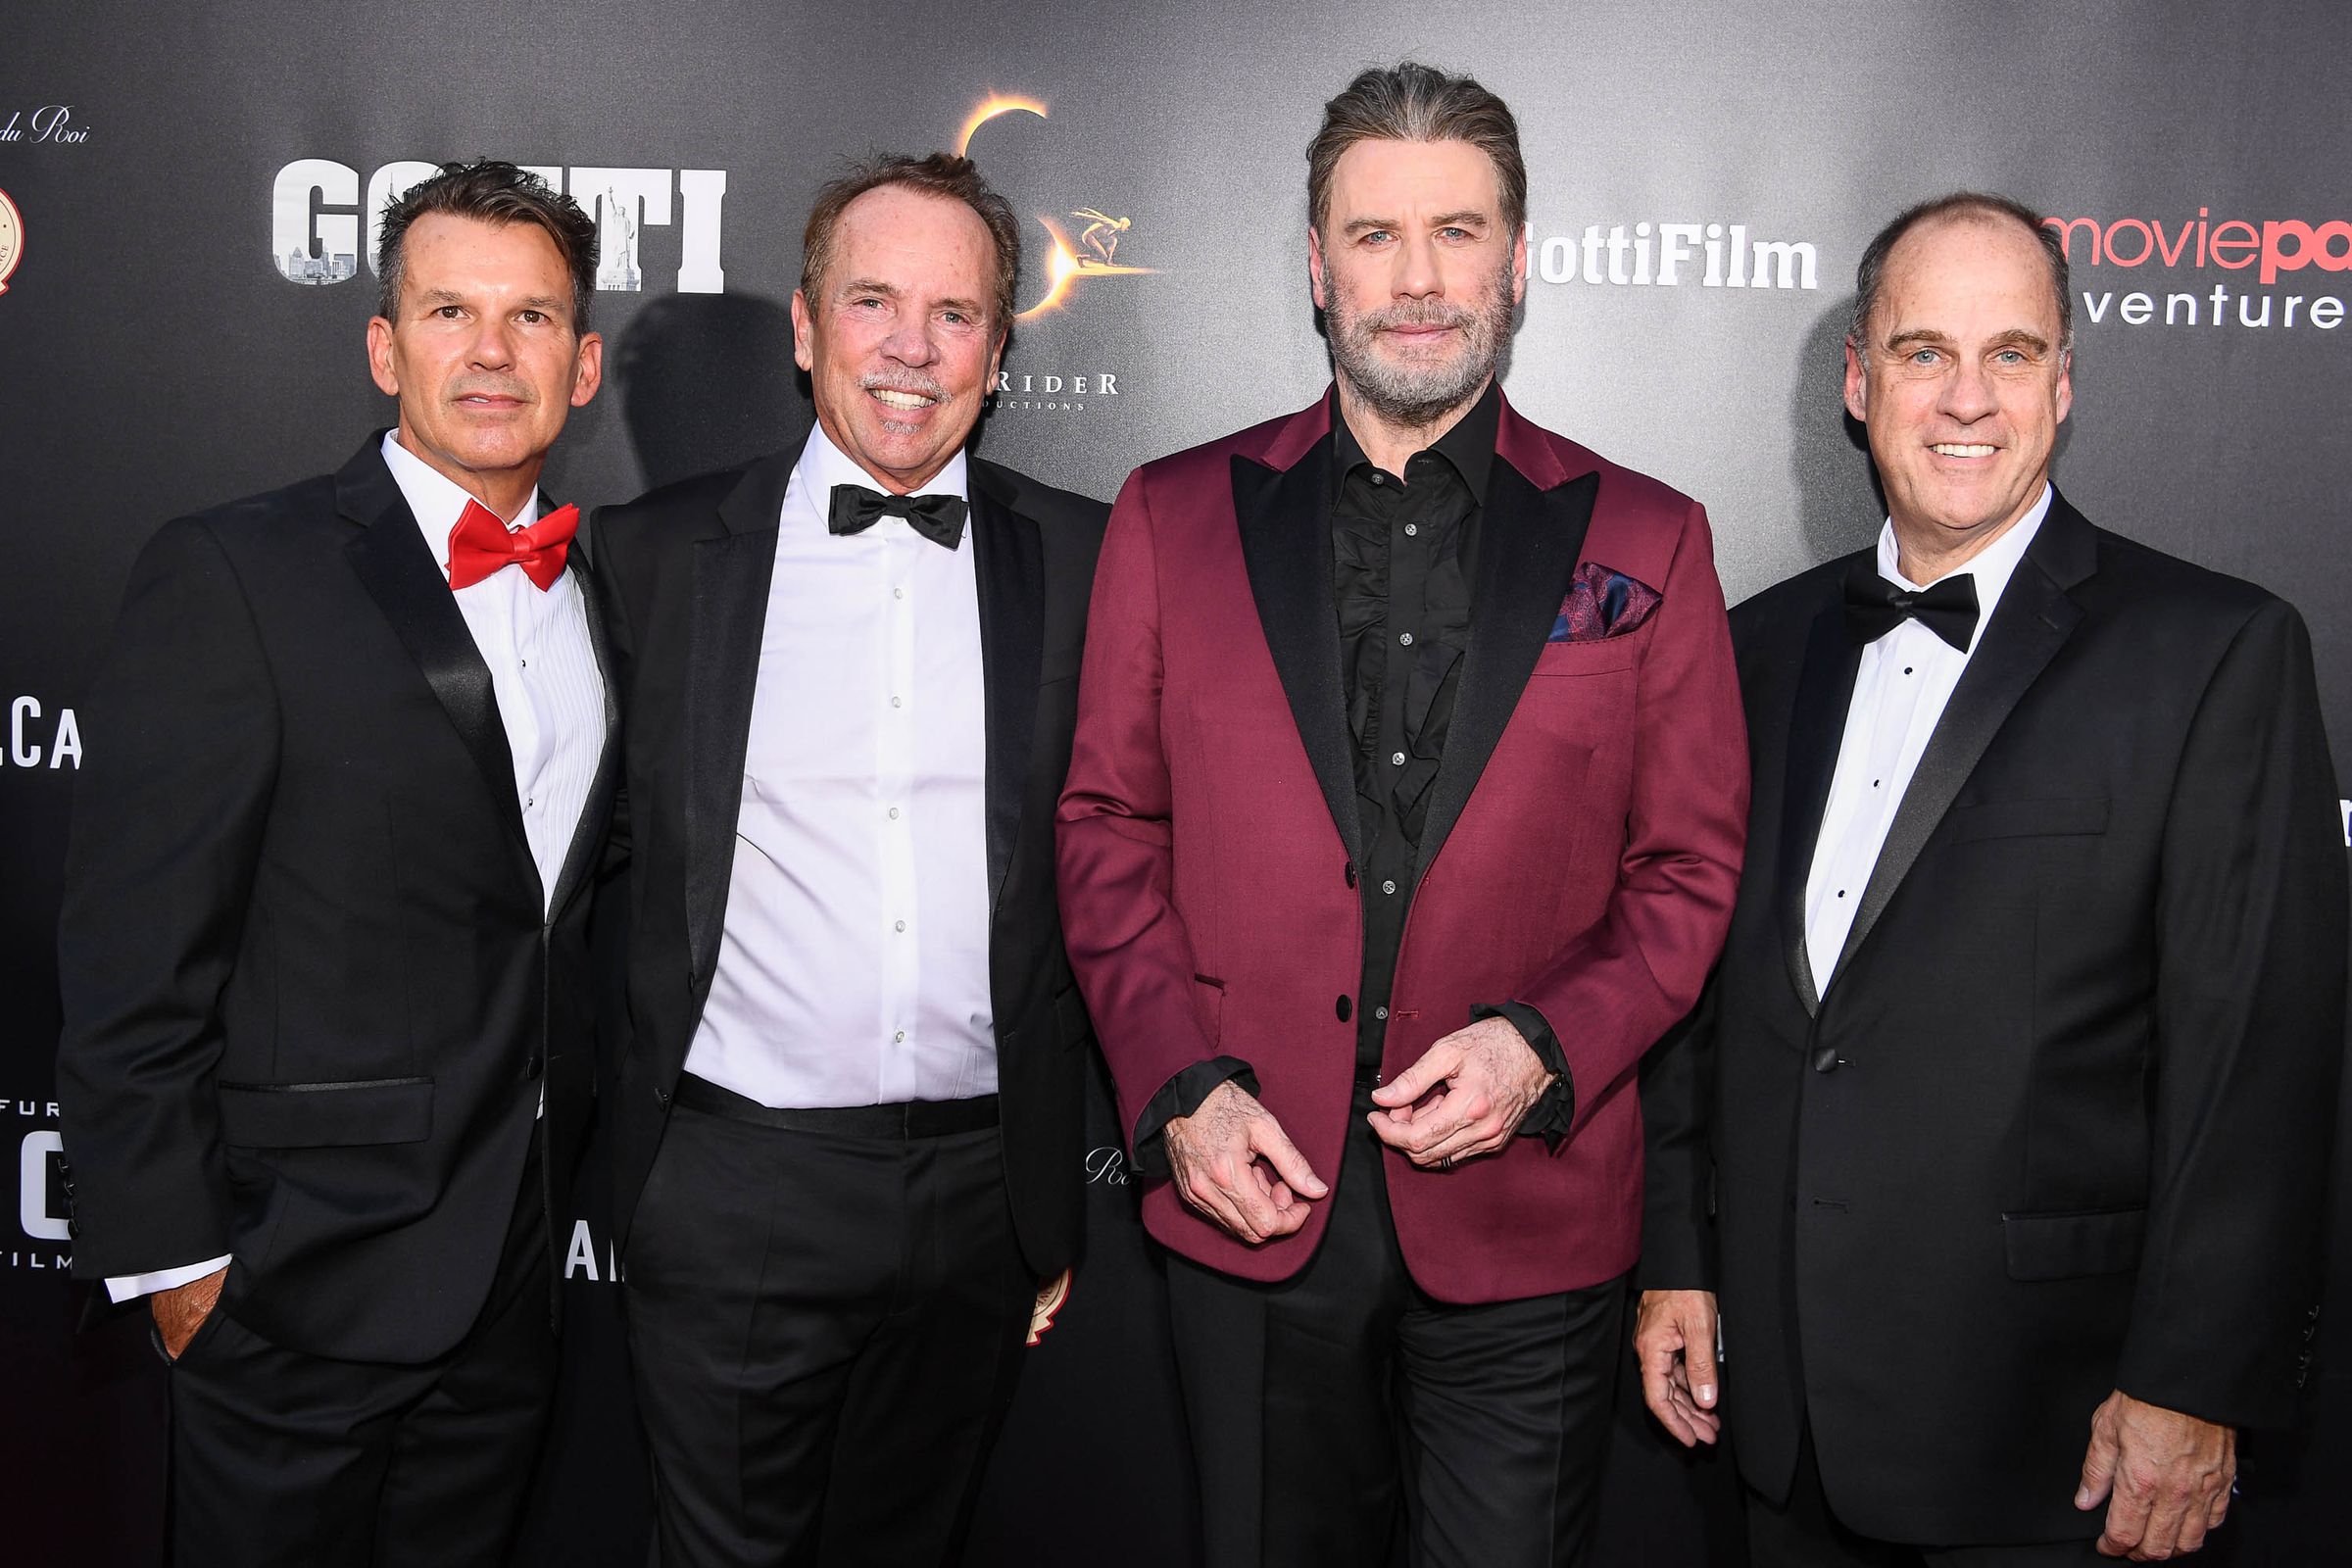 Mitch Lowe (second left) and Ted Farnsworth (right) attending the New York premiere of Gotti, a MoviePass Ventures production starring John Travolta (second right) in June of 2018. 